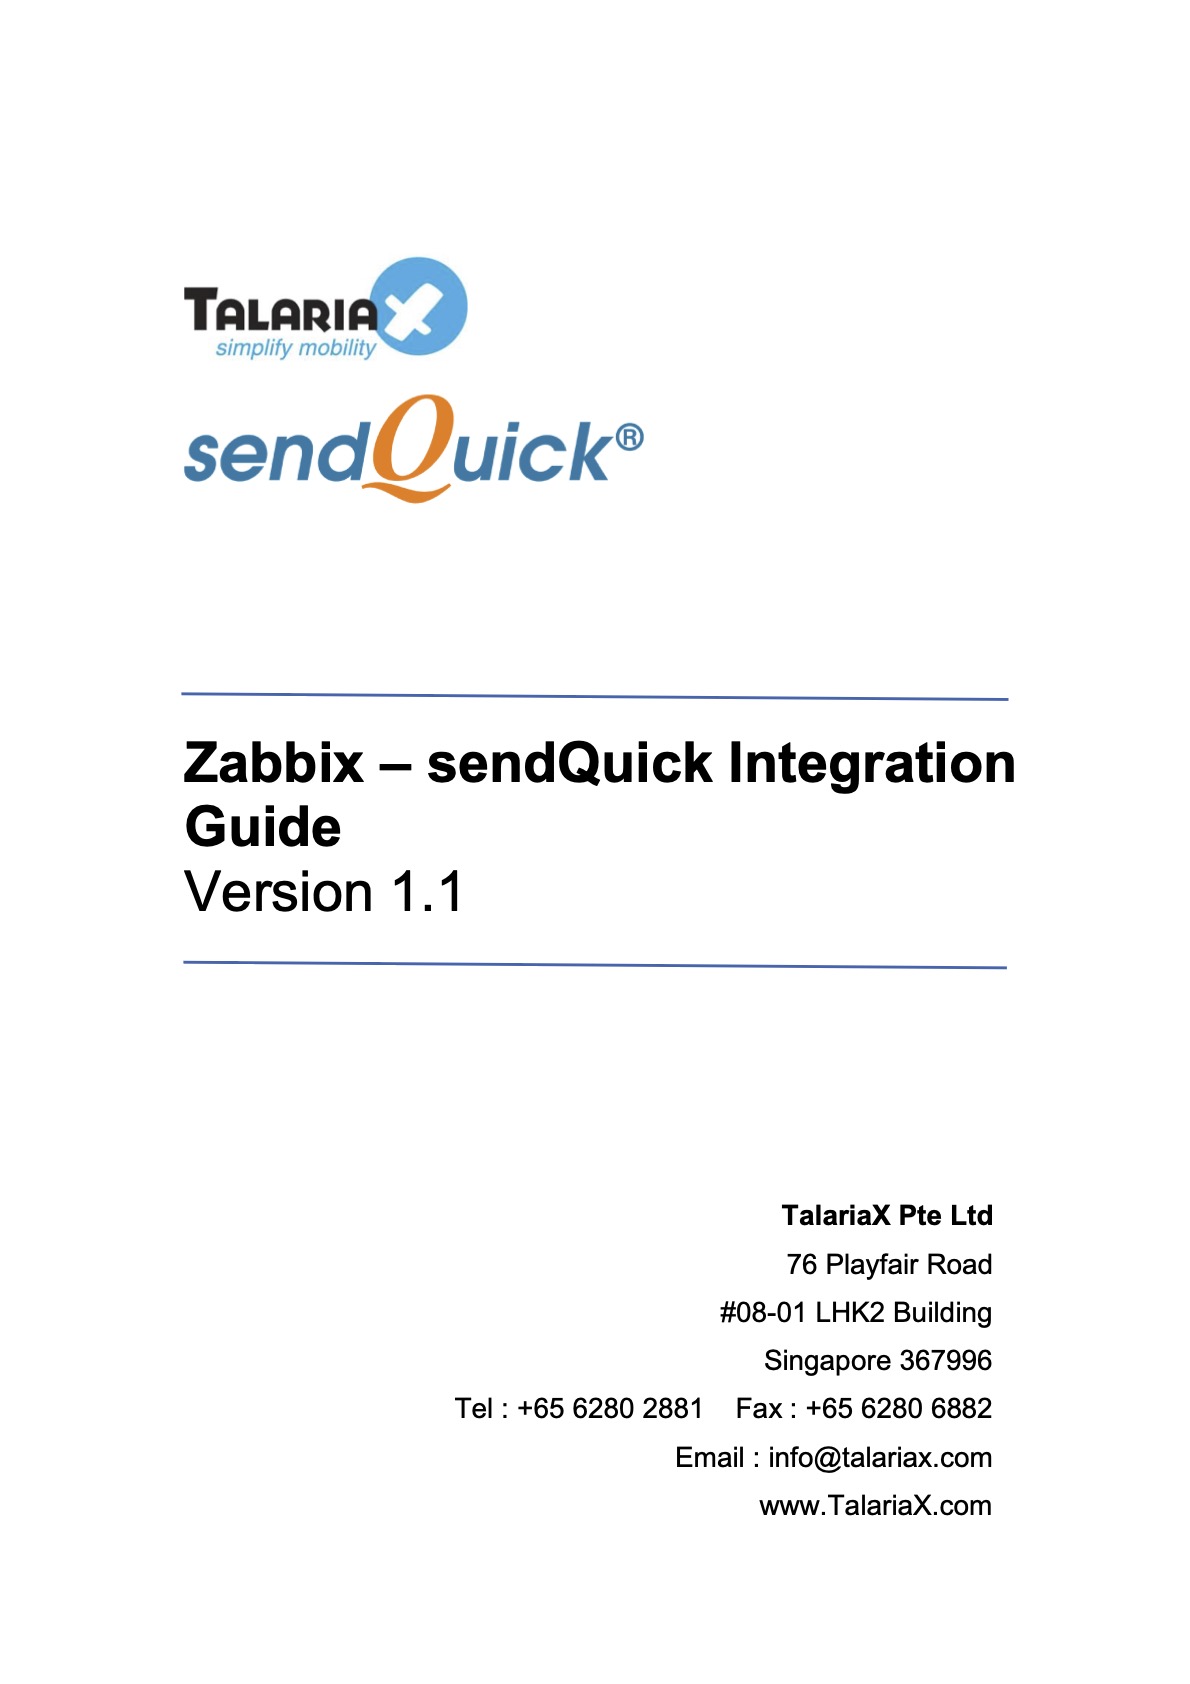 You are currently viewing Zabbix and sendQuick Integration Guide V1.1